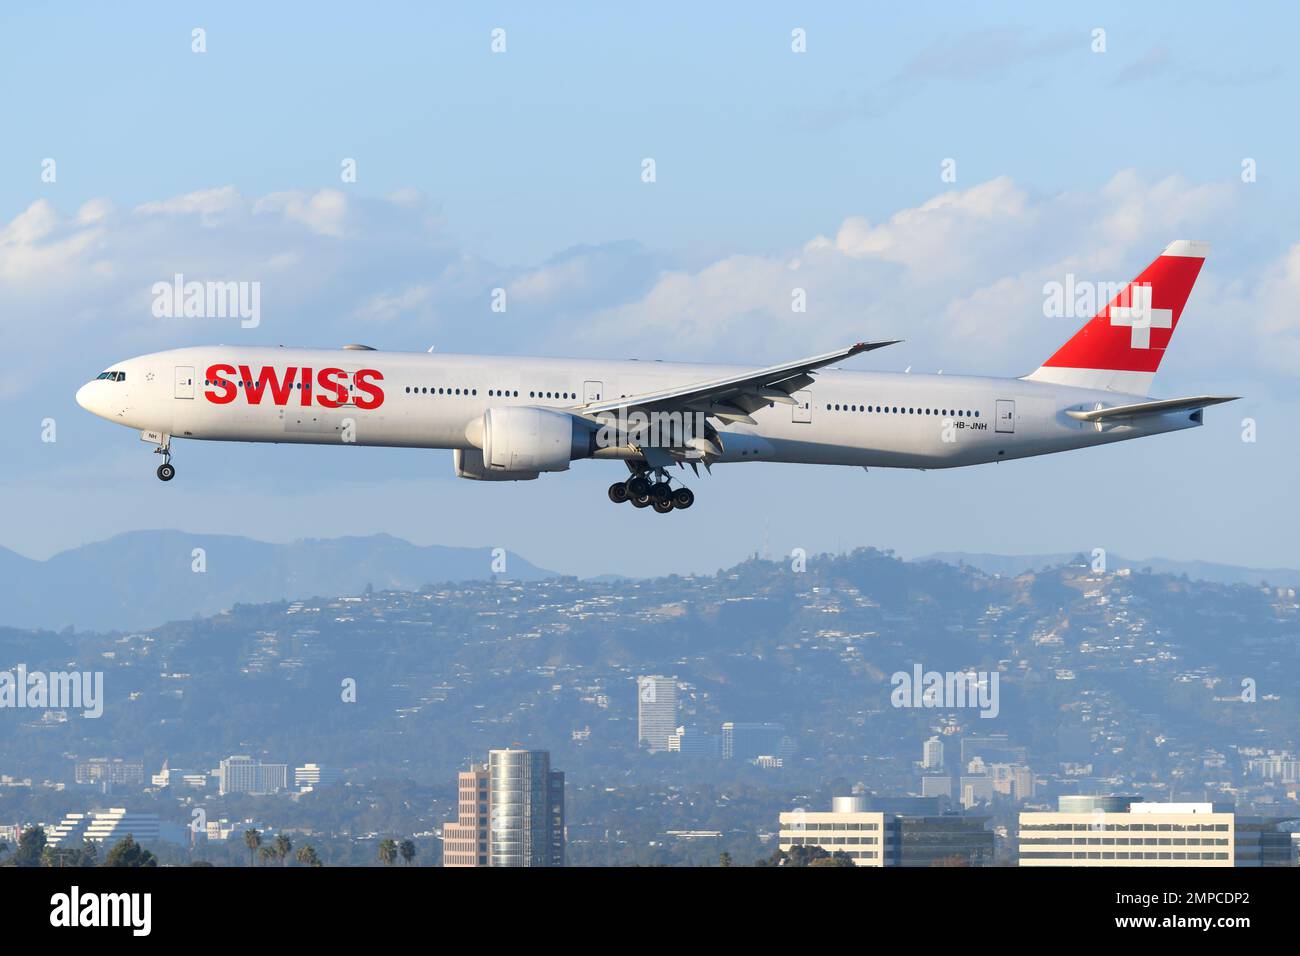 Swiss Airlines Boeing 777 landing. Airplane 777-300ER of Swiss Air Lines flying. Stock Photo